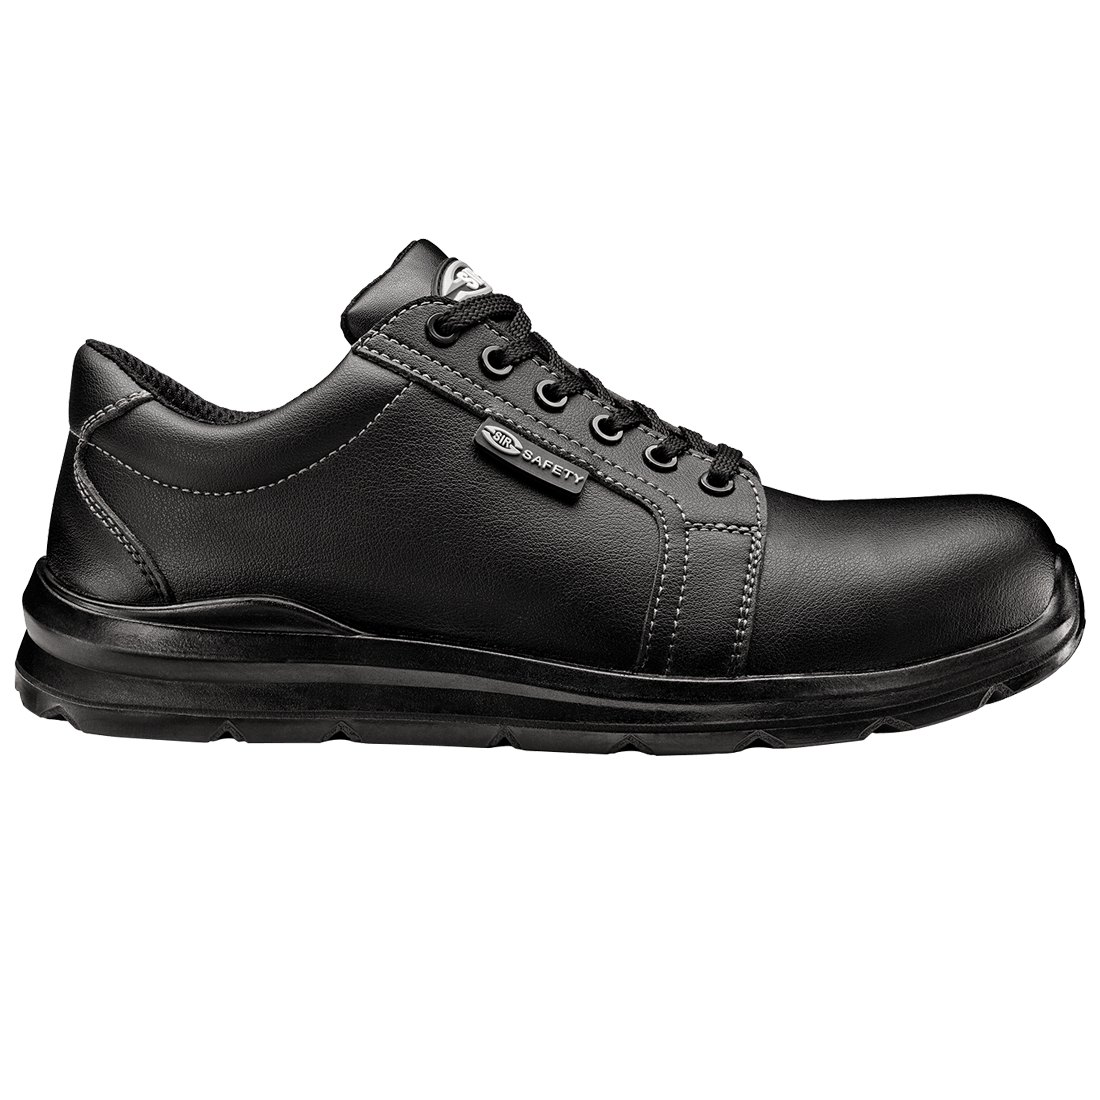 LOW BLACK FOBIA SHOE System Safety Sir 